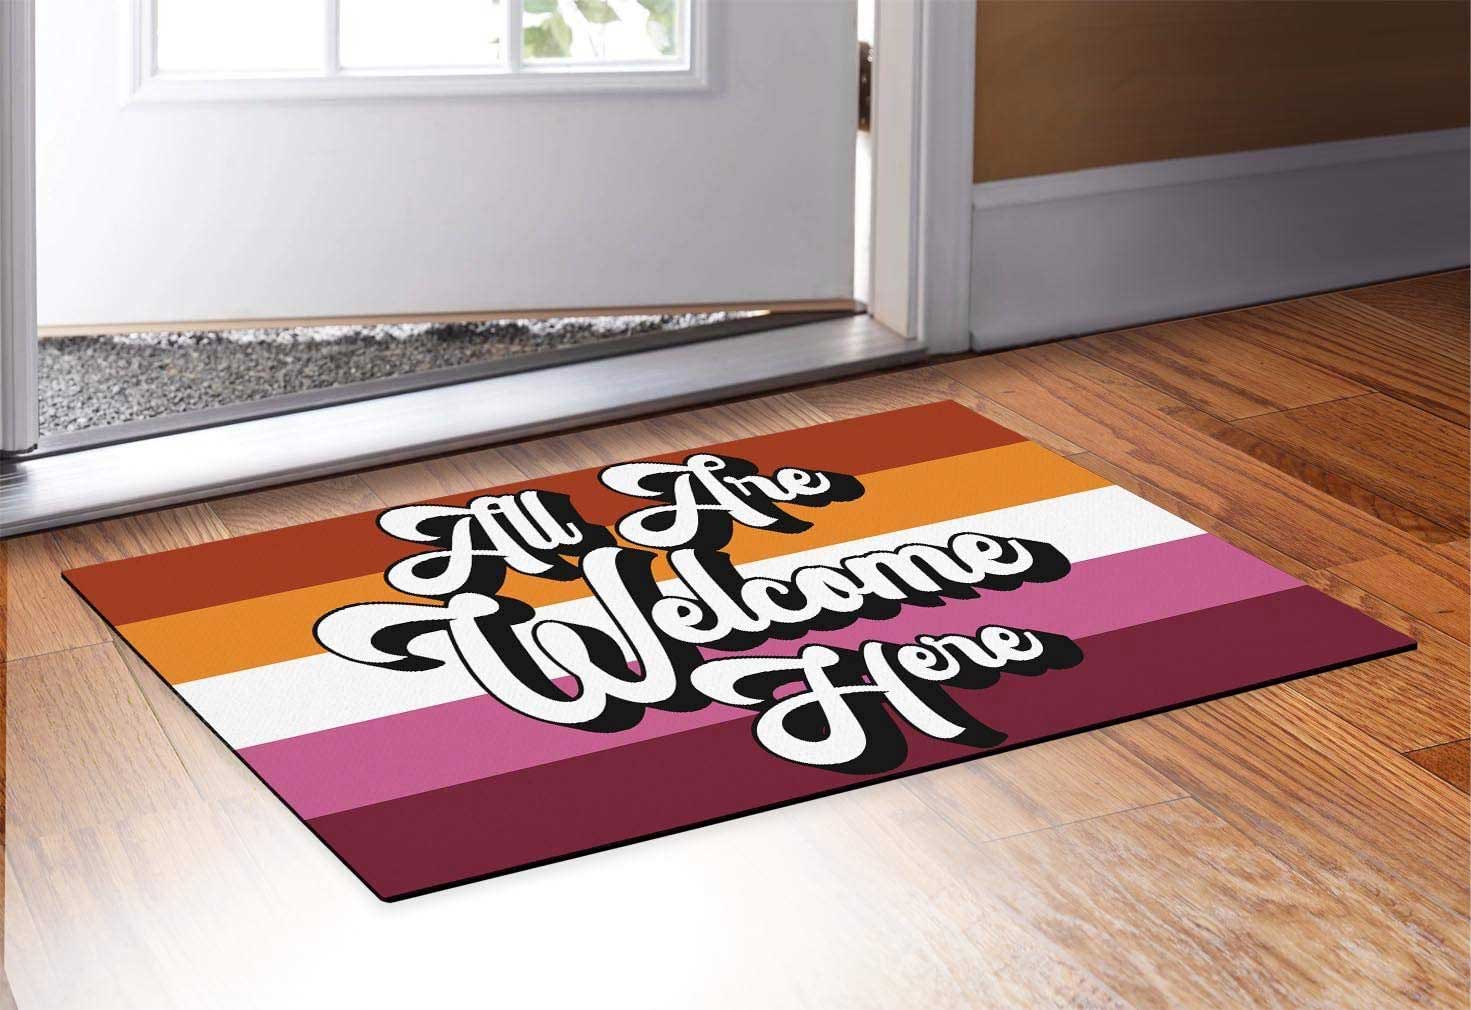 Lesbian Pride Doormat All Are Welcome Here Lesbian Gifts Decorative Doormat Lesbian